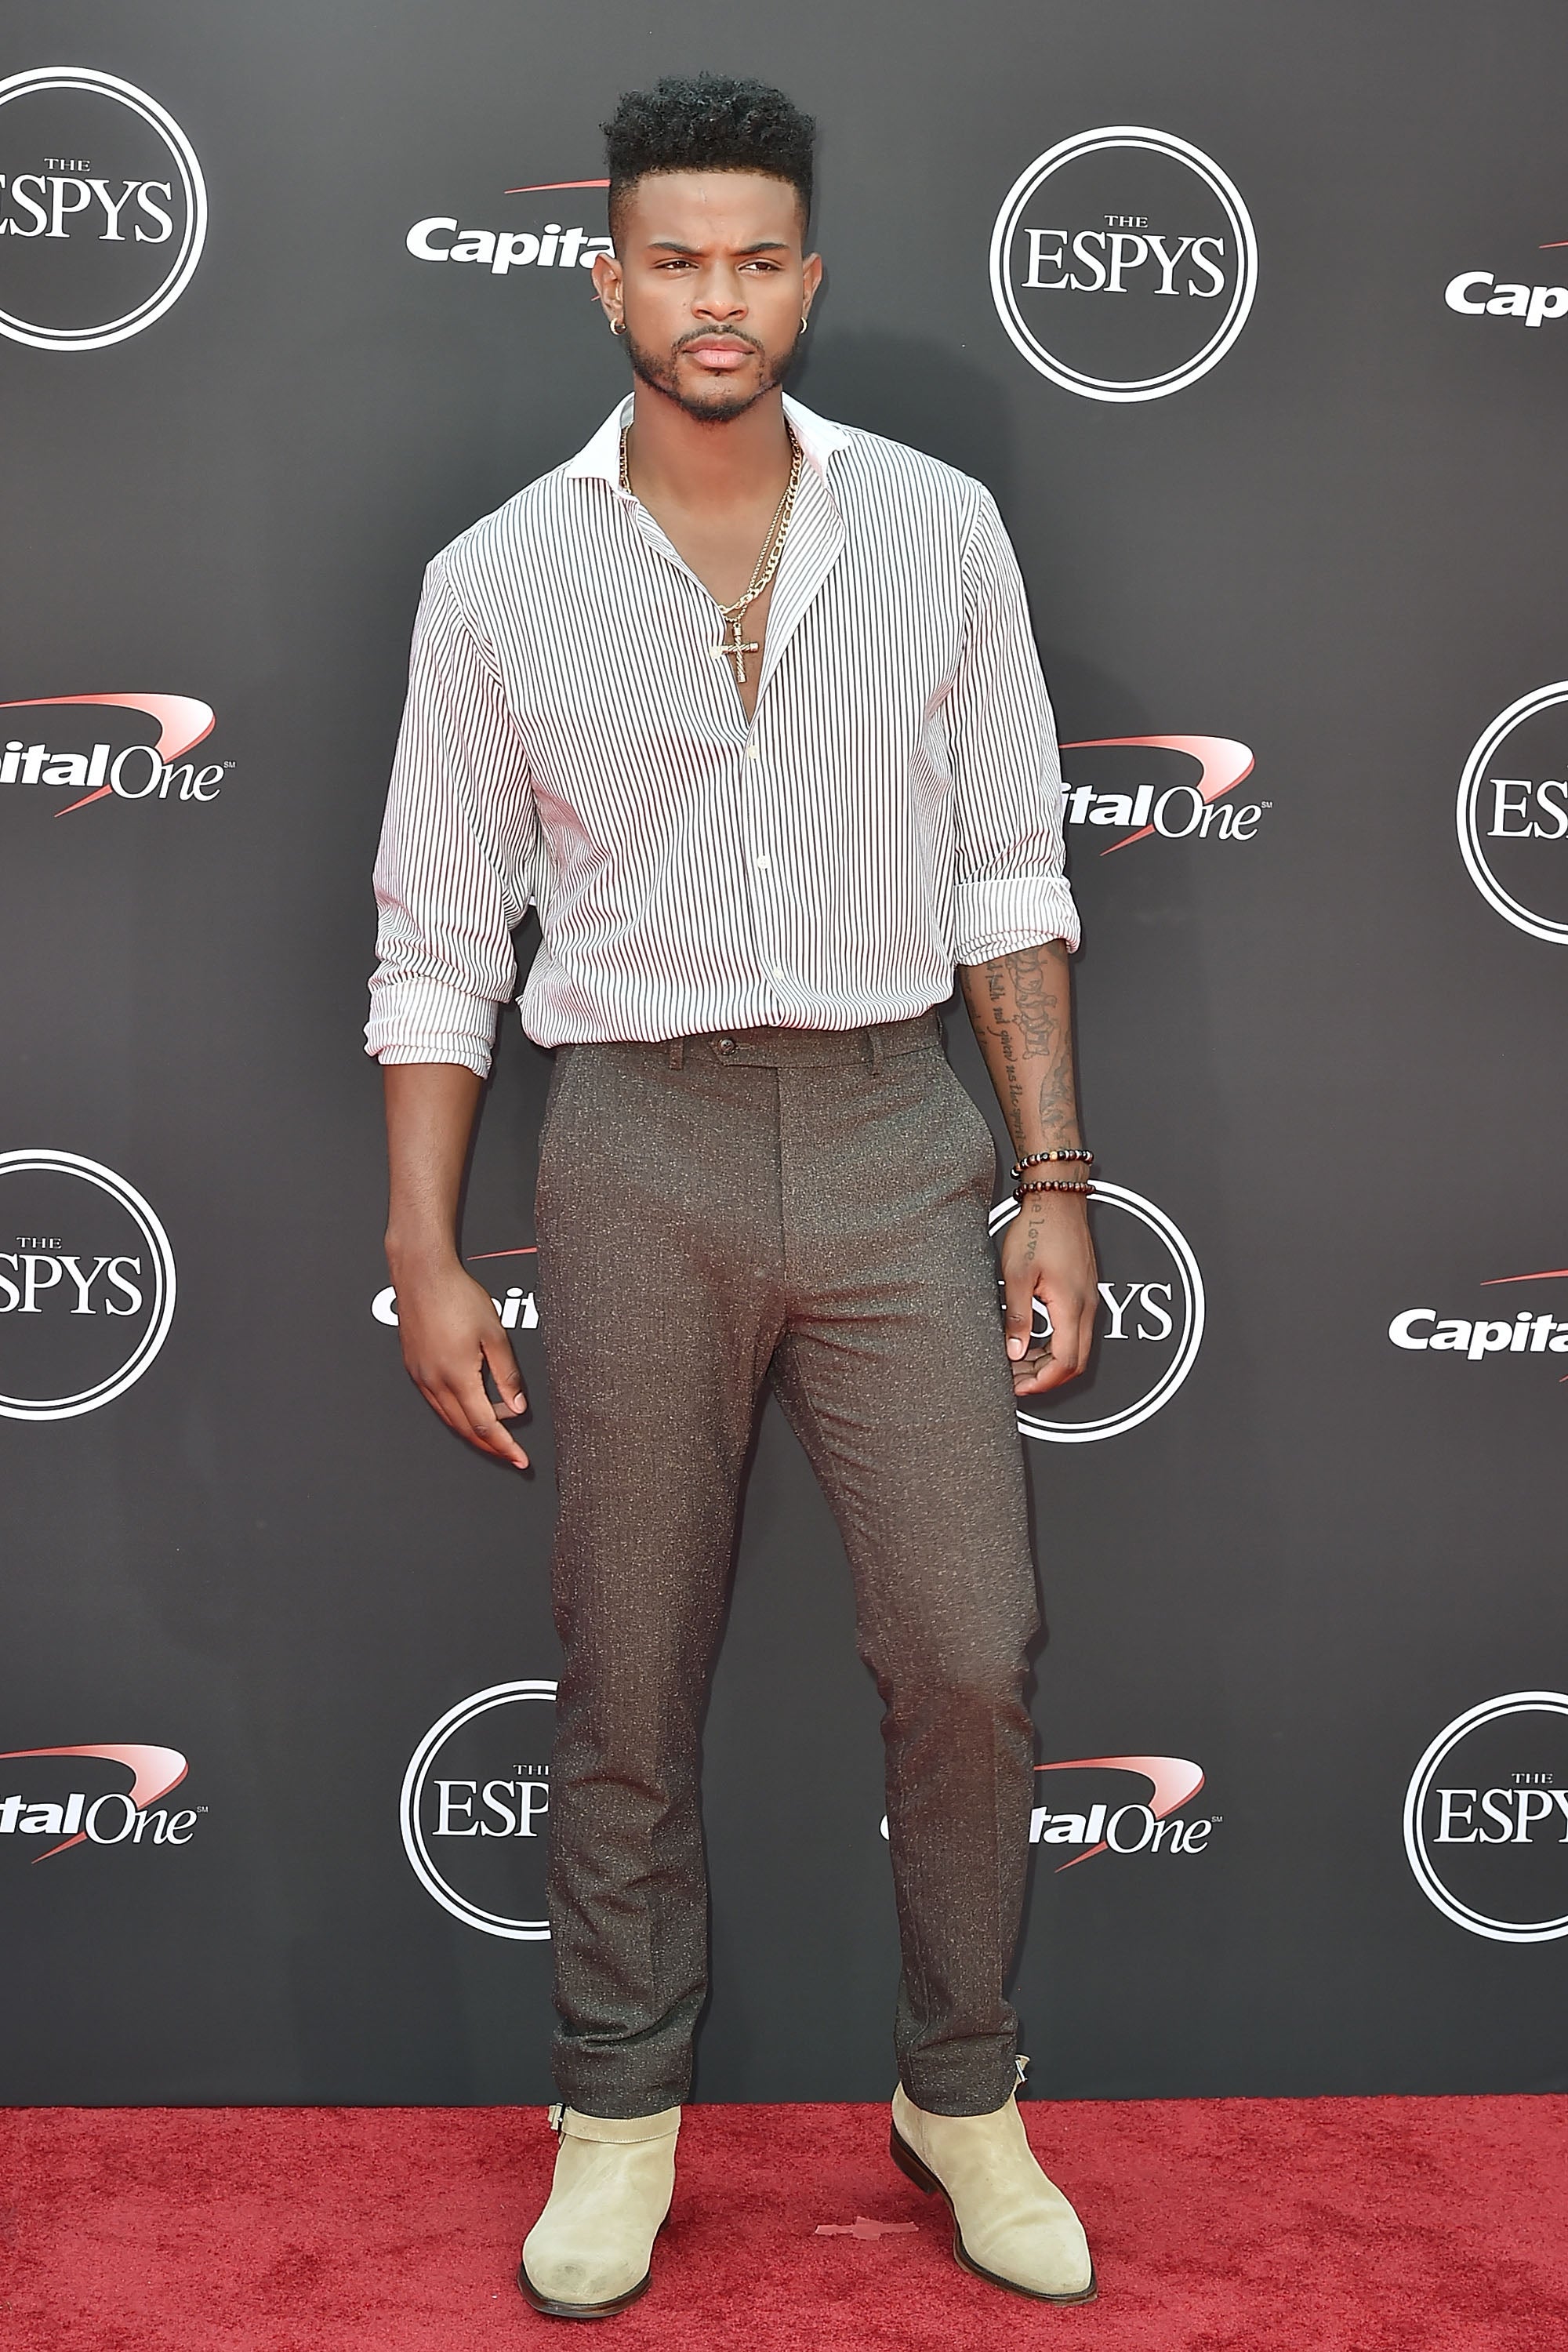 Razzle Dazzle! This Year's ESPY Awards Brought Out All The Style Stars
